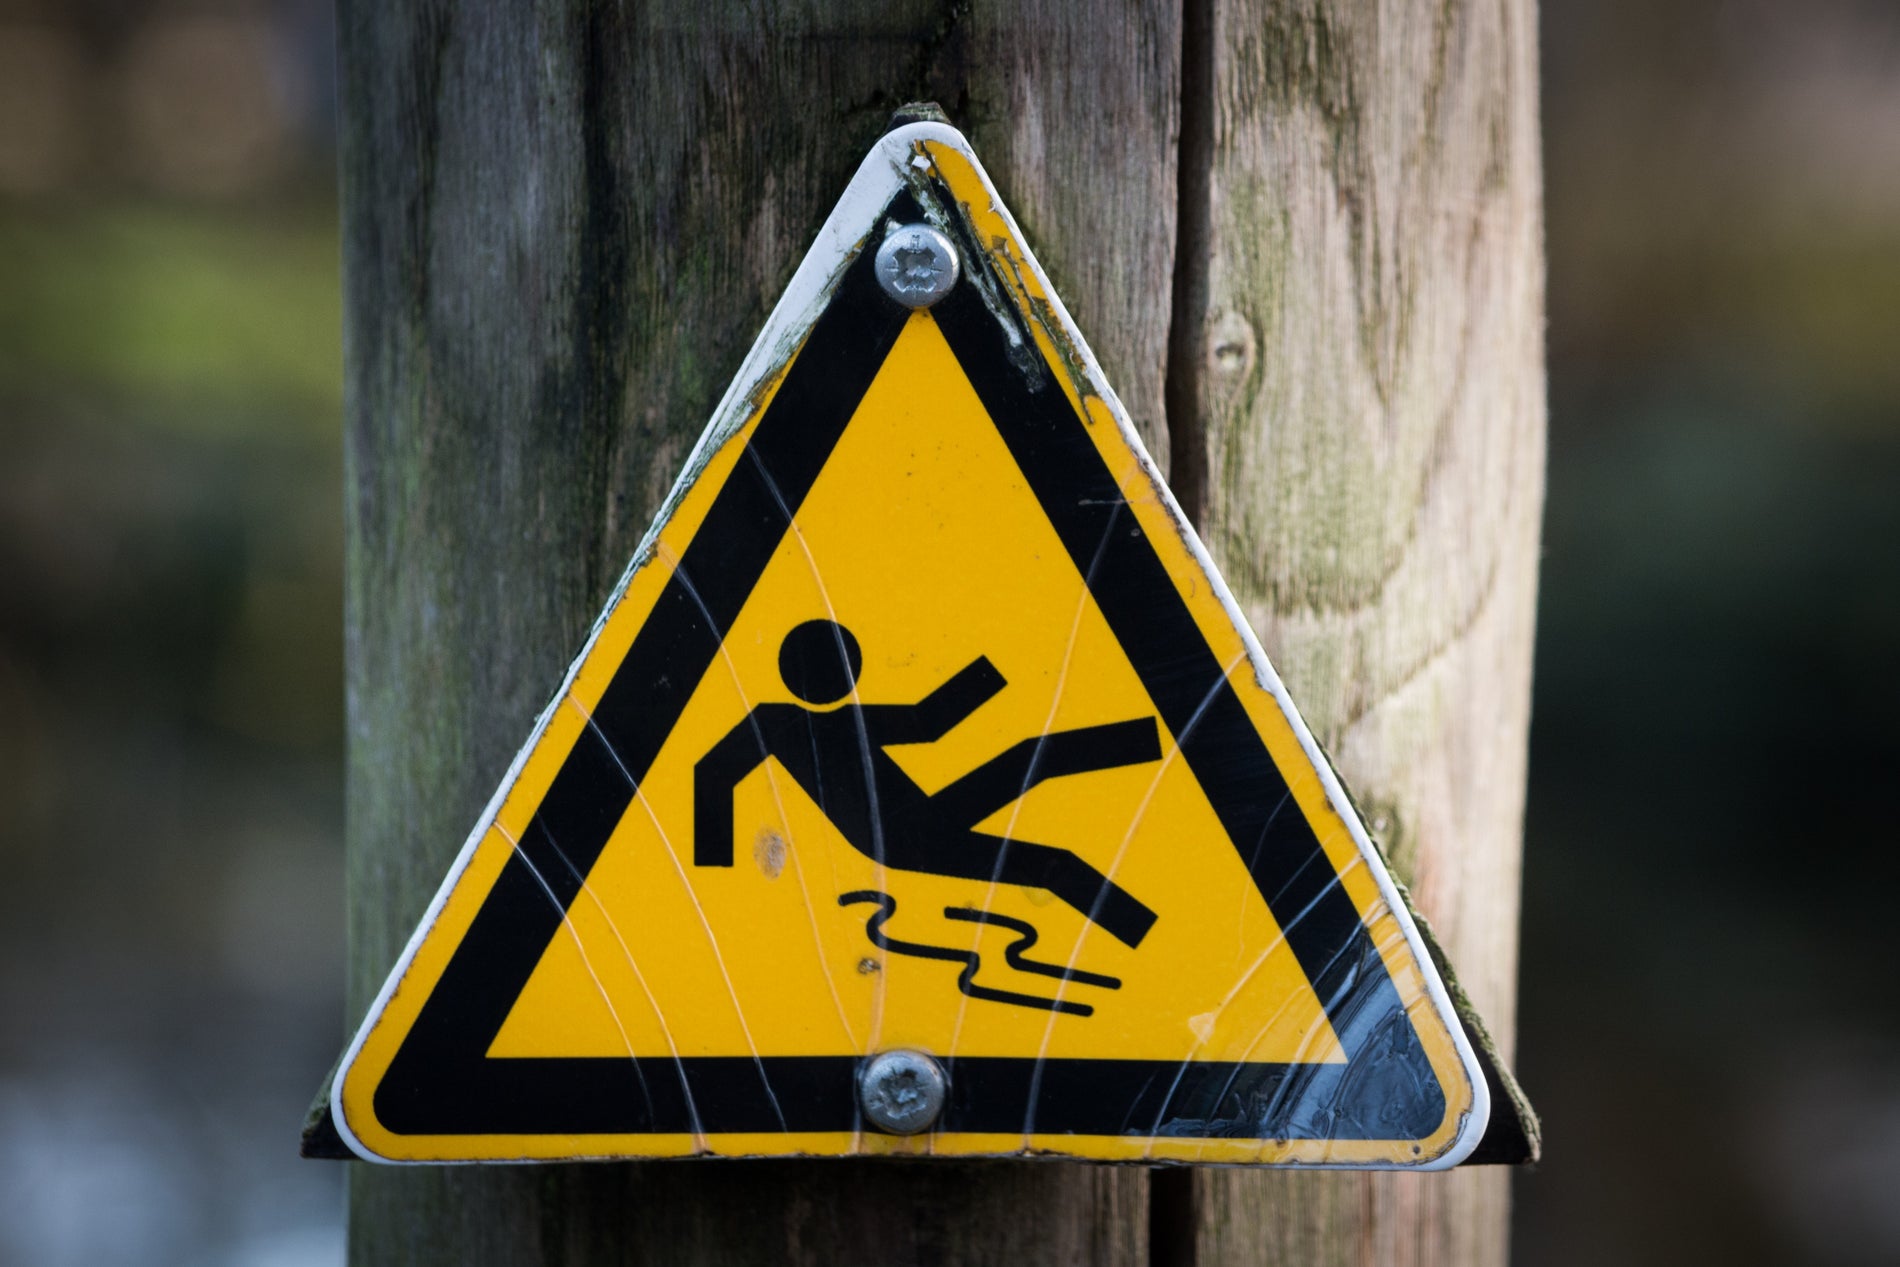 How to Avoid a Dangerous Slip-and-Fall This November